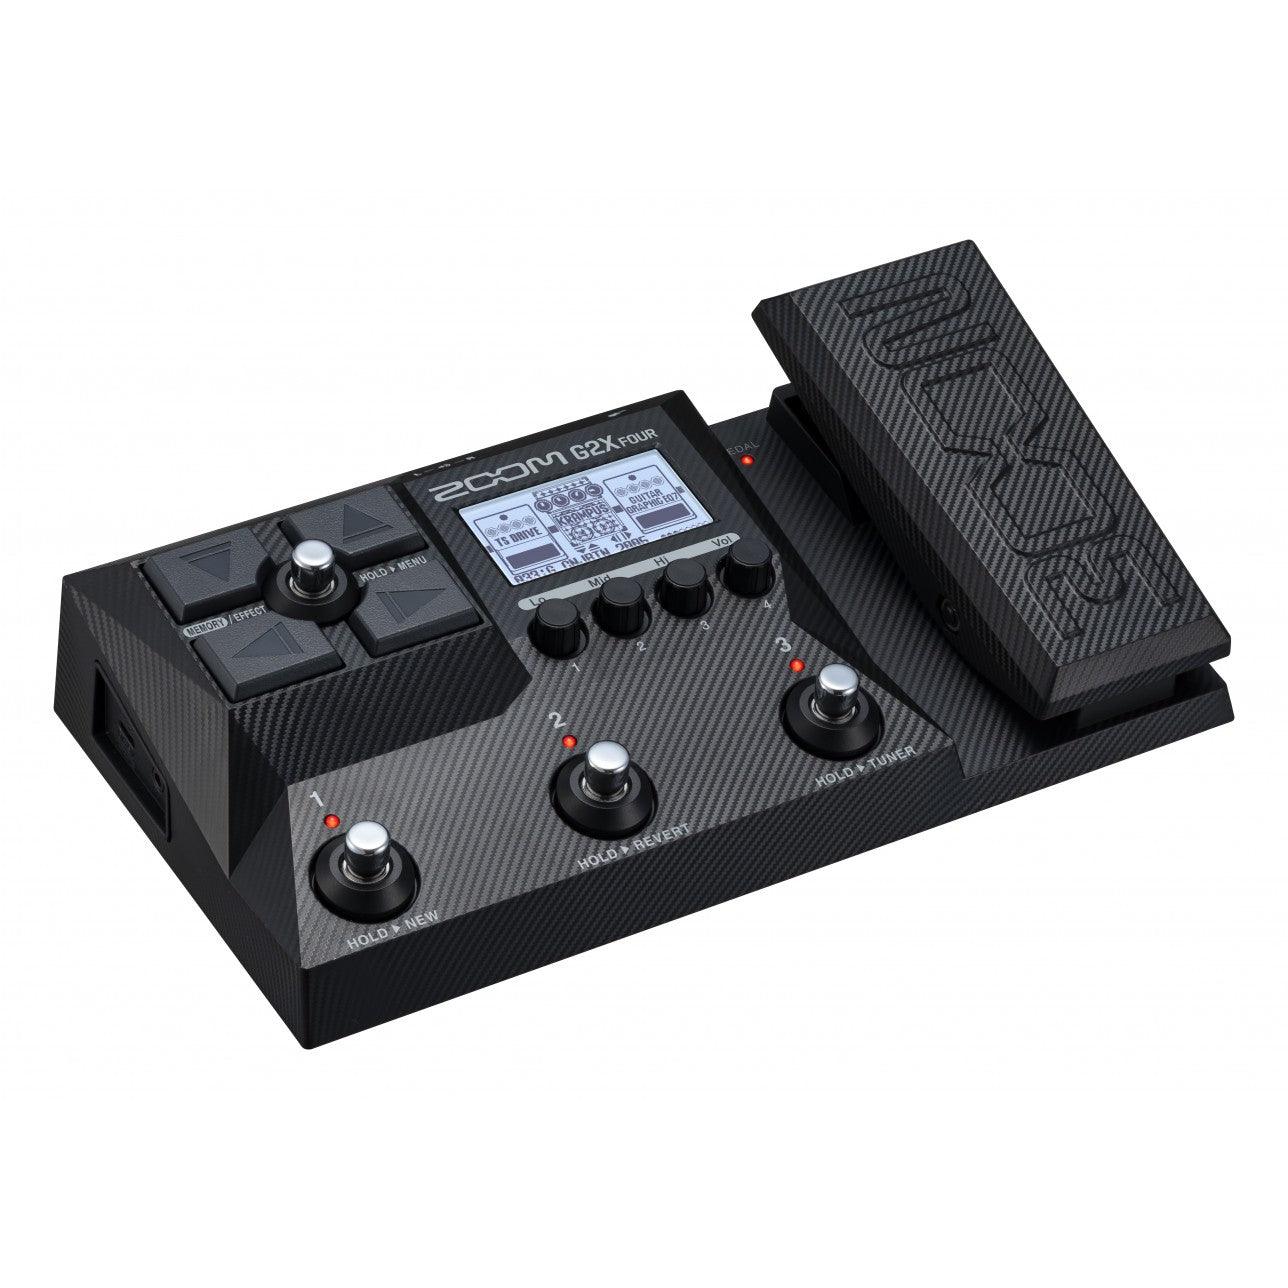 ZOOM G2X FOUR GUITAR EFFECTS & AMP SIMULATOR - Guitar - Effects Pedals by Zoom at Muso's Stuff